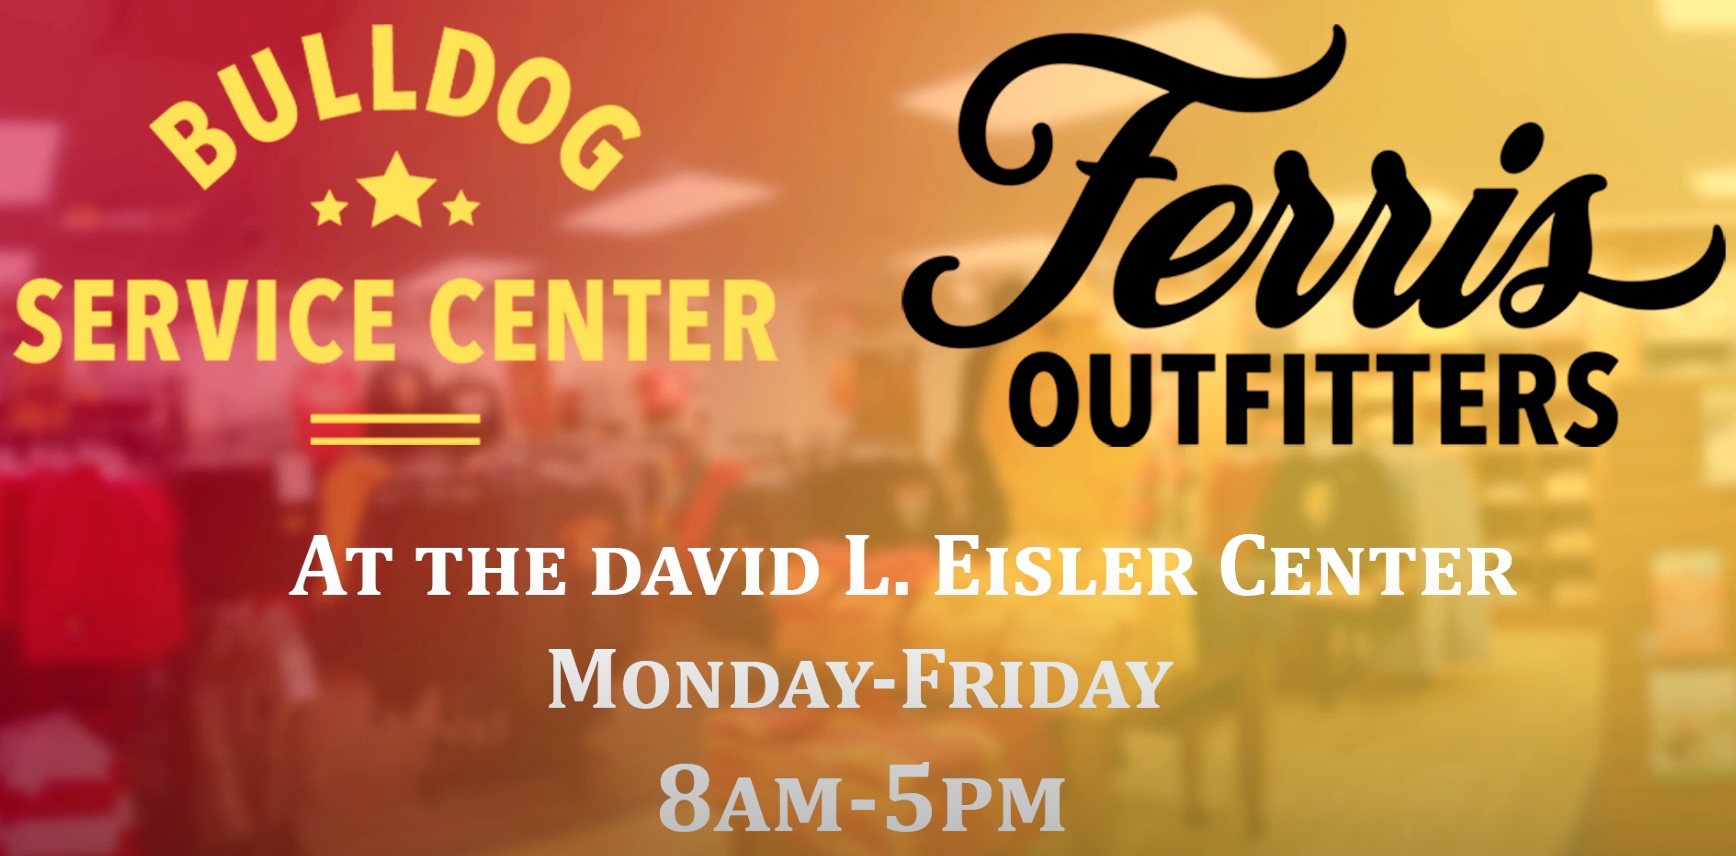 Ferris outfitters and Bulldog Service Center Logos and hours